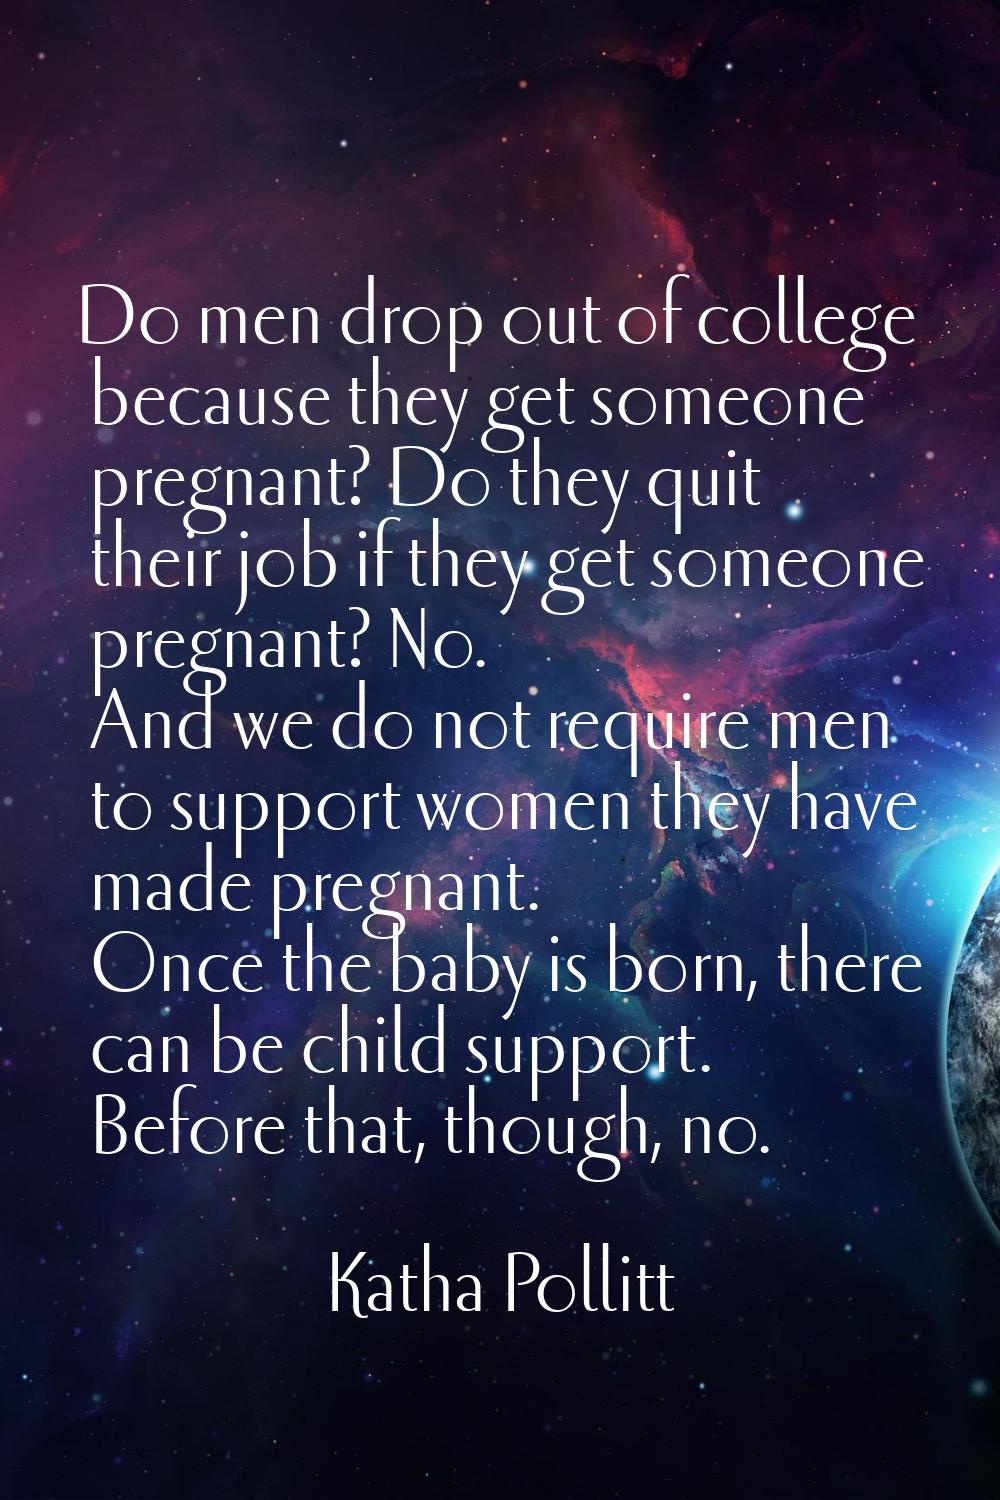 Do men drop out of college because they get someone pregnant? Do they quit their job if they get so